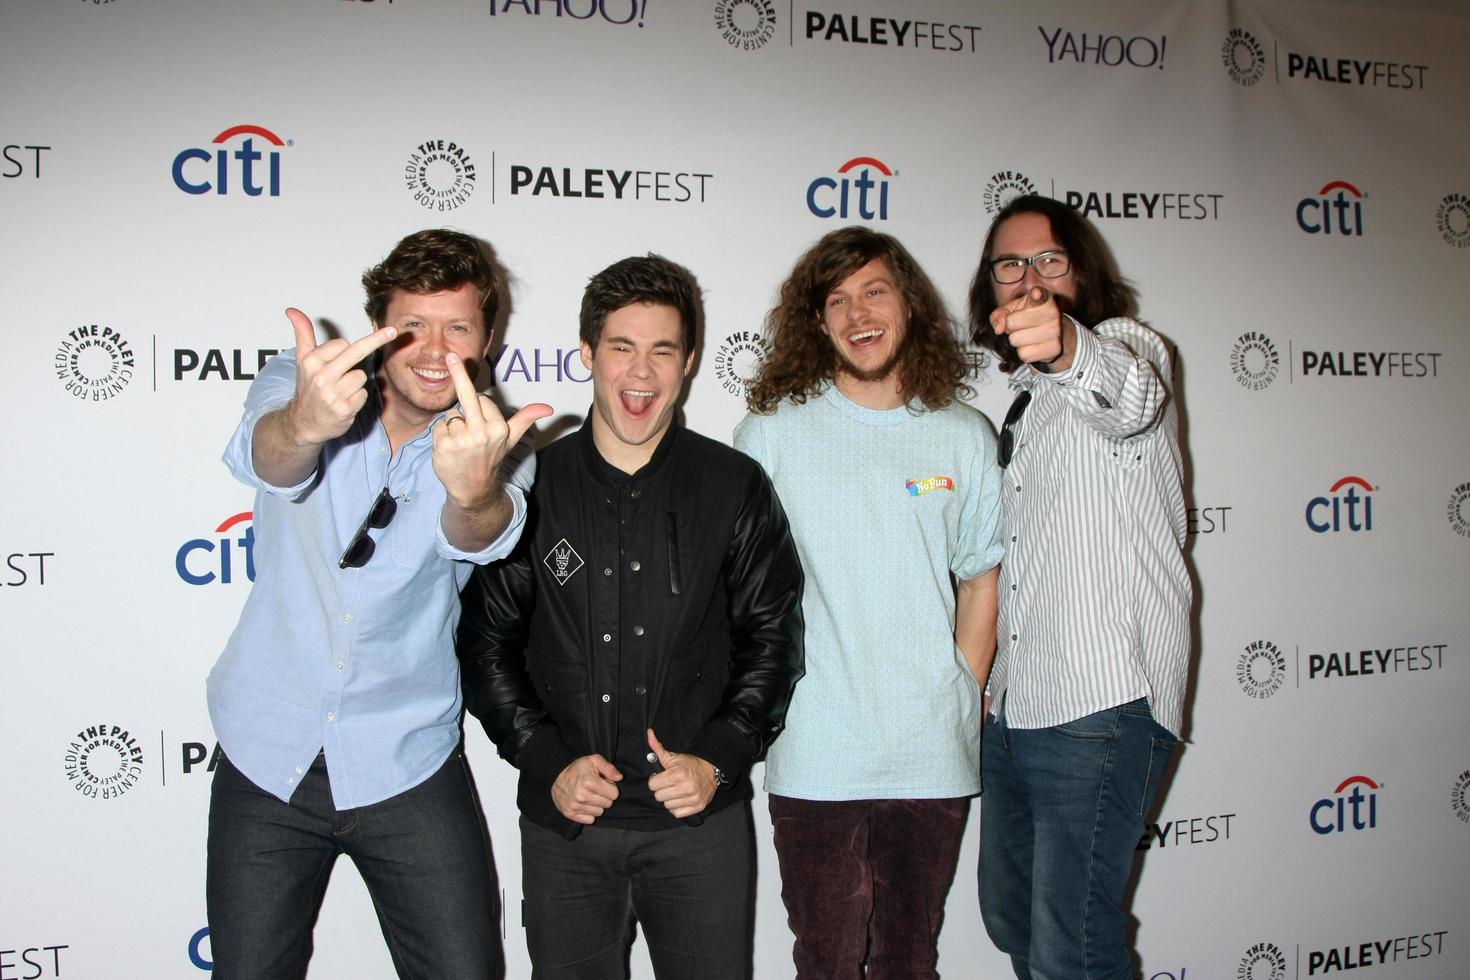 LOS ANGELES, MAR 7 - Anders Holm, Adam DeVine, Blake Anderson, Kyle Newacheck at the PaleyFEST LA 2015, Salute to Comedy Central at the Dolby Theater on March 7, 2015 in Los Angeles, CA photo